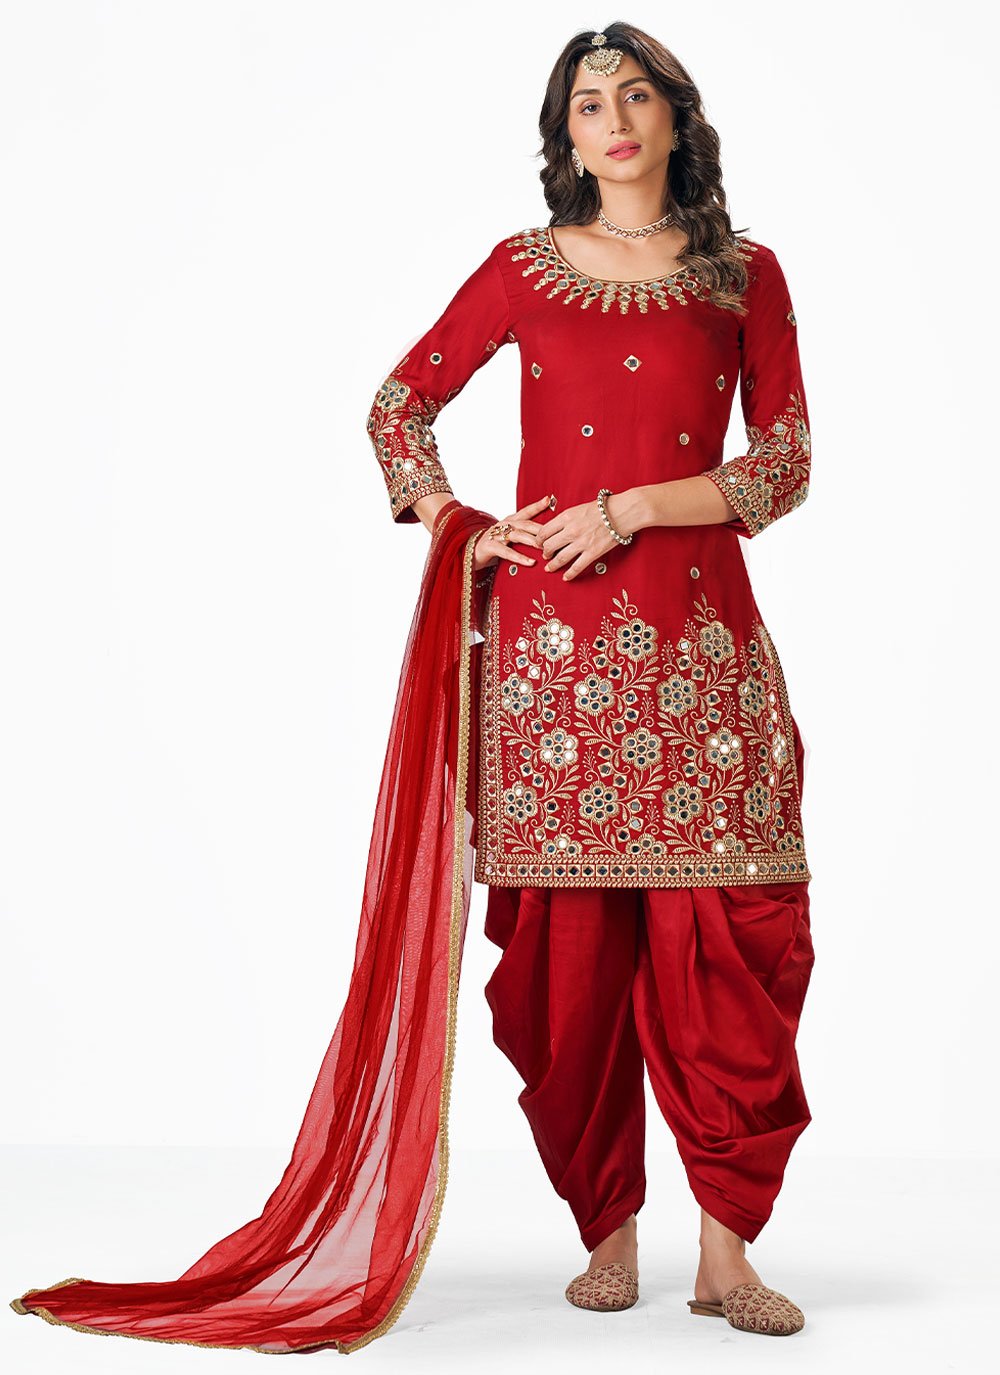 Red Punjabi Suits: A Symbol of Vibrancy and Tradition - SOULFASHIONBUZZ